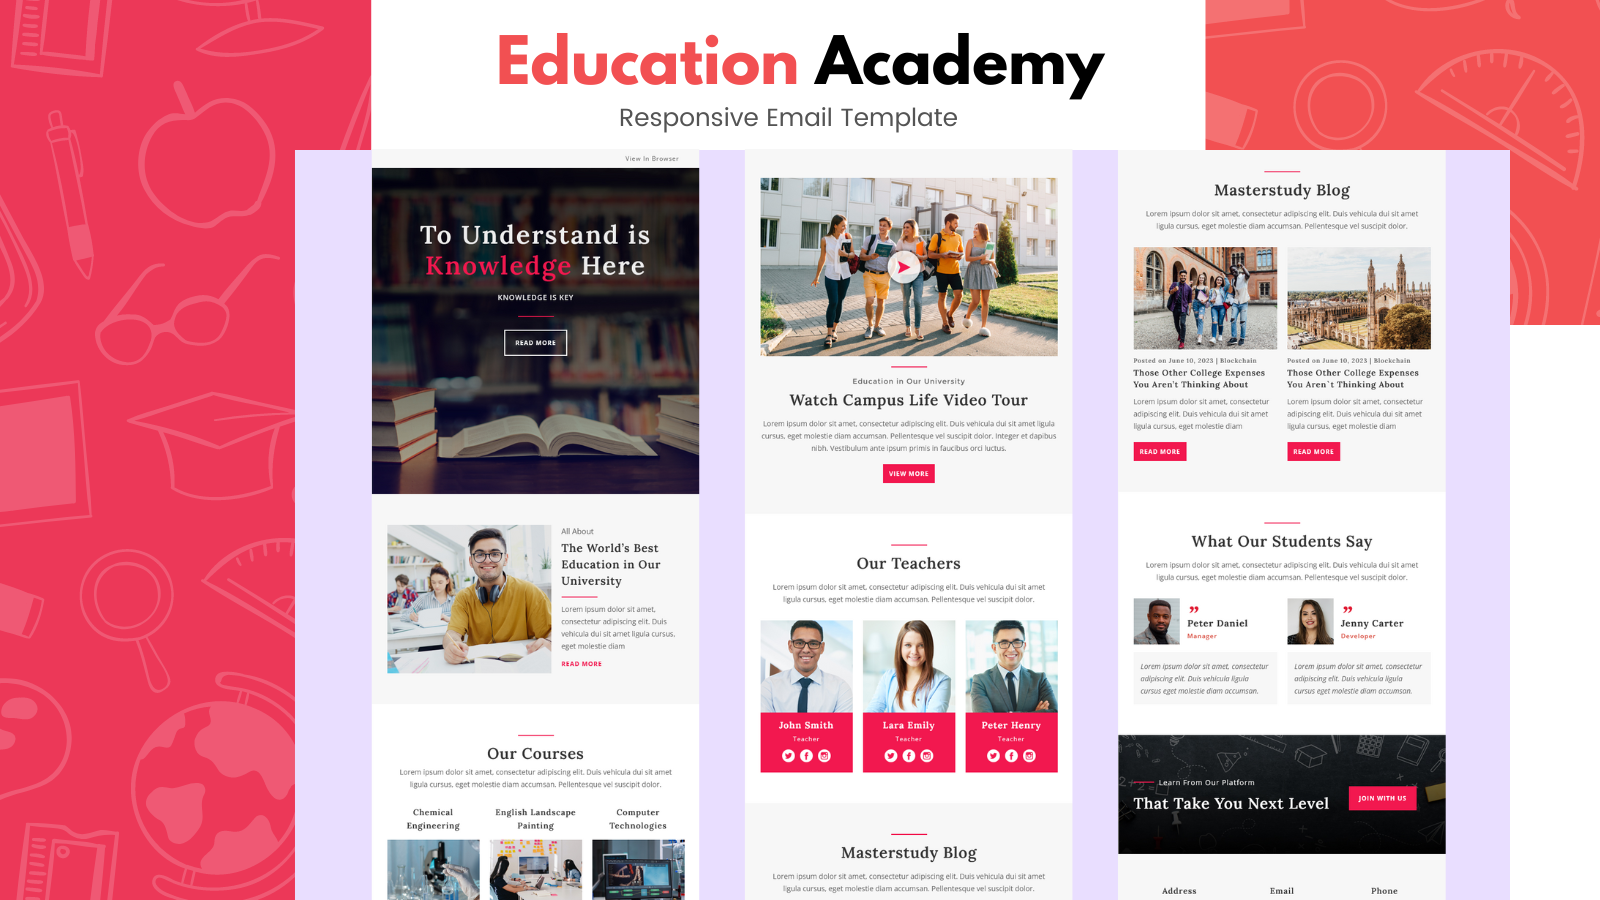 Education Academy – Responsive Email Template